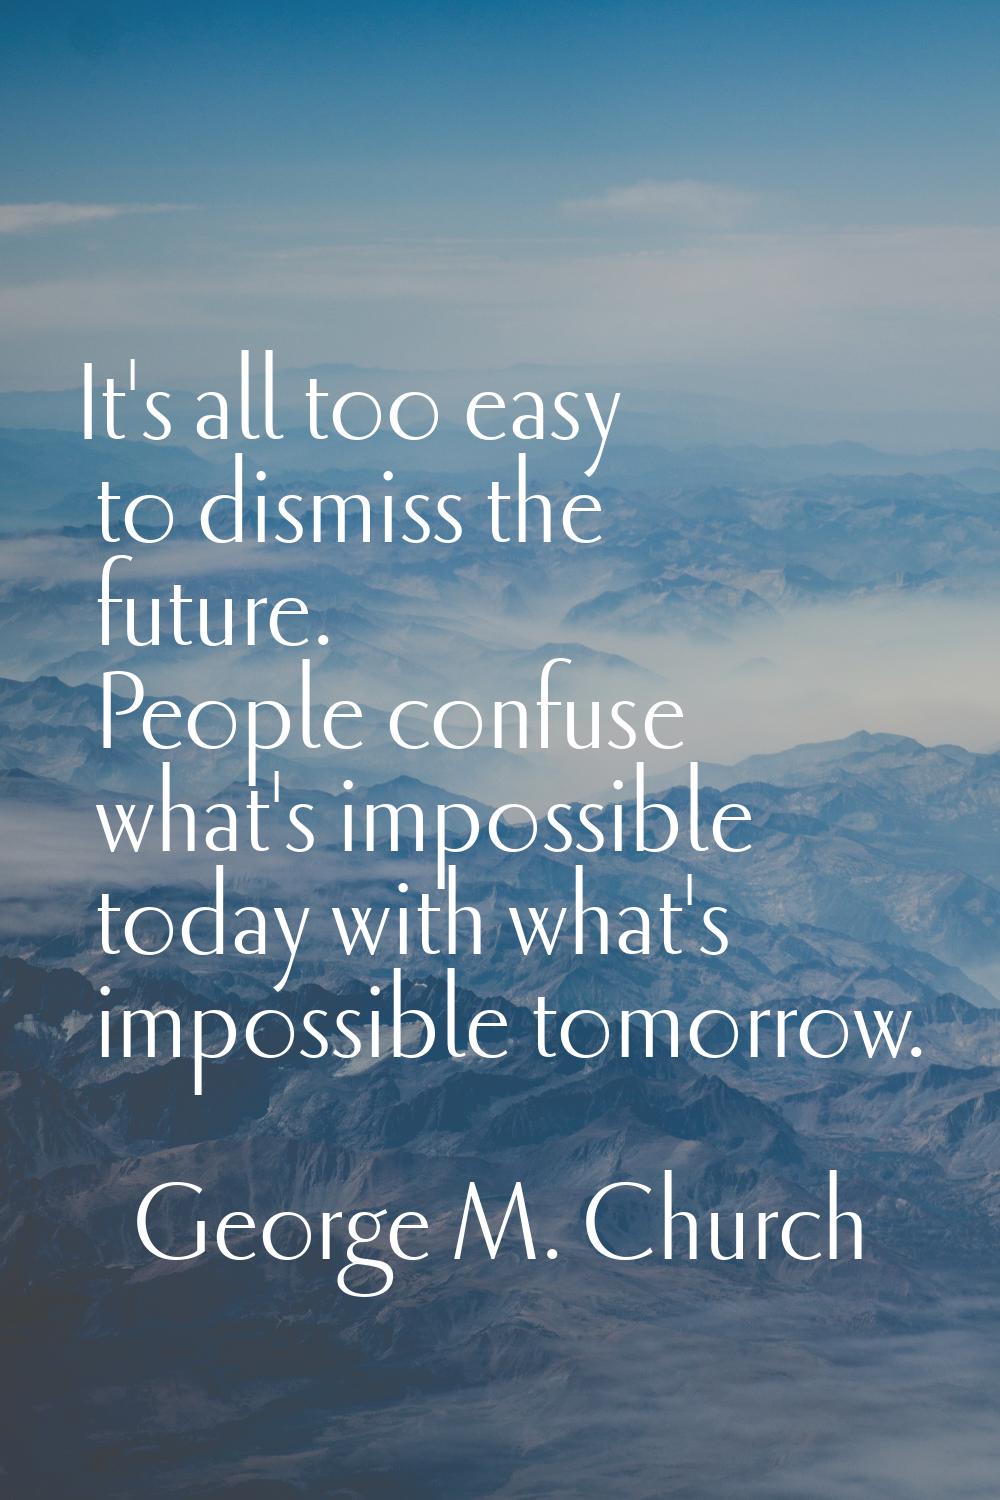 It's all too easy to dismiss the future. People confuse what's impossible today with what's impossi